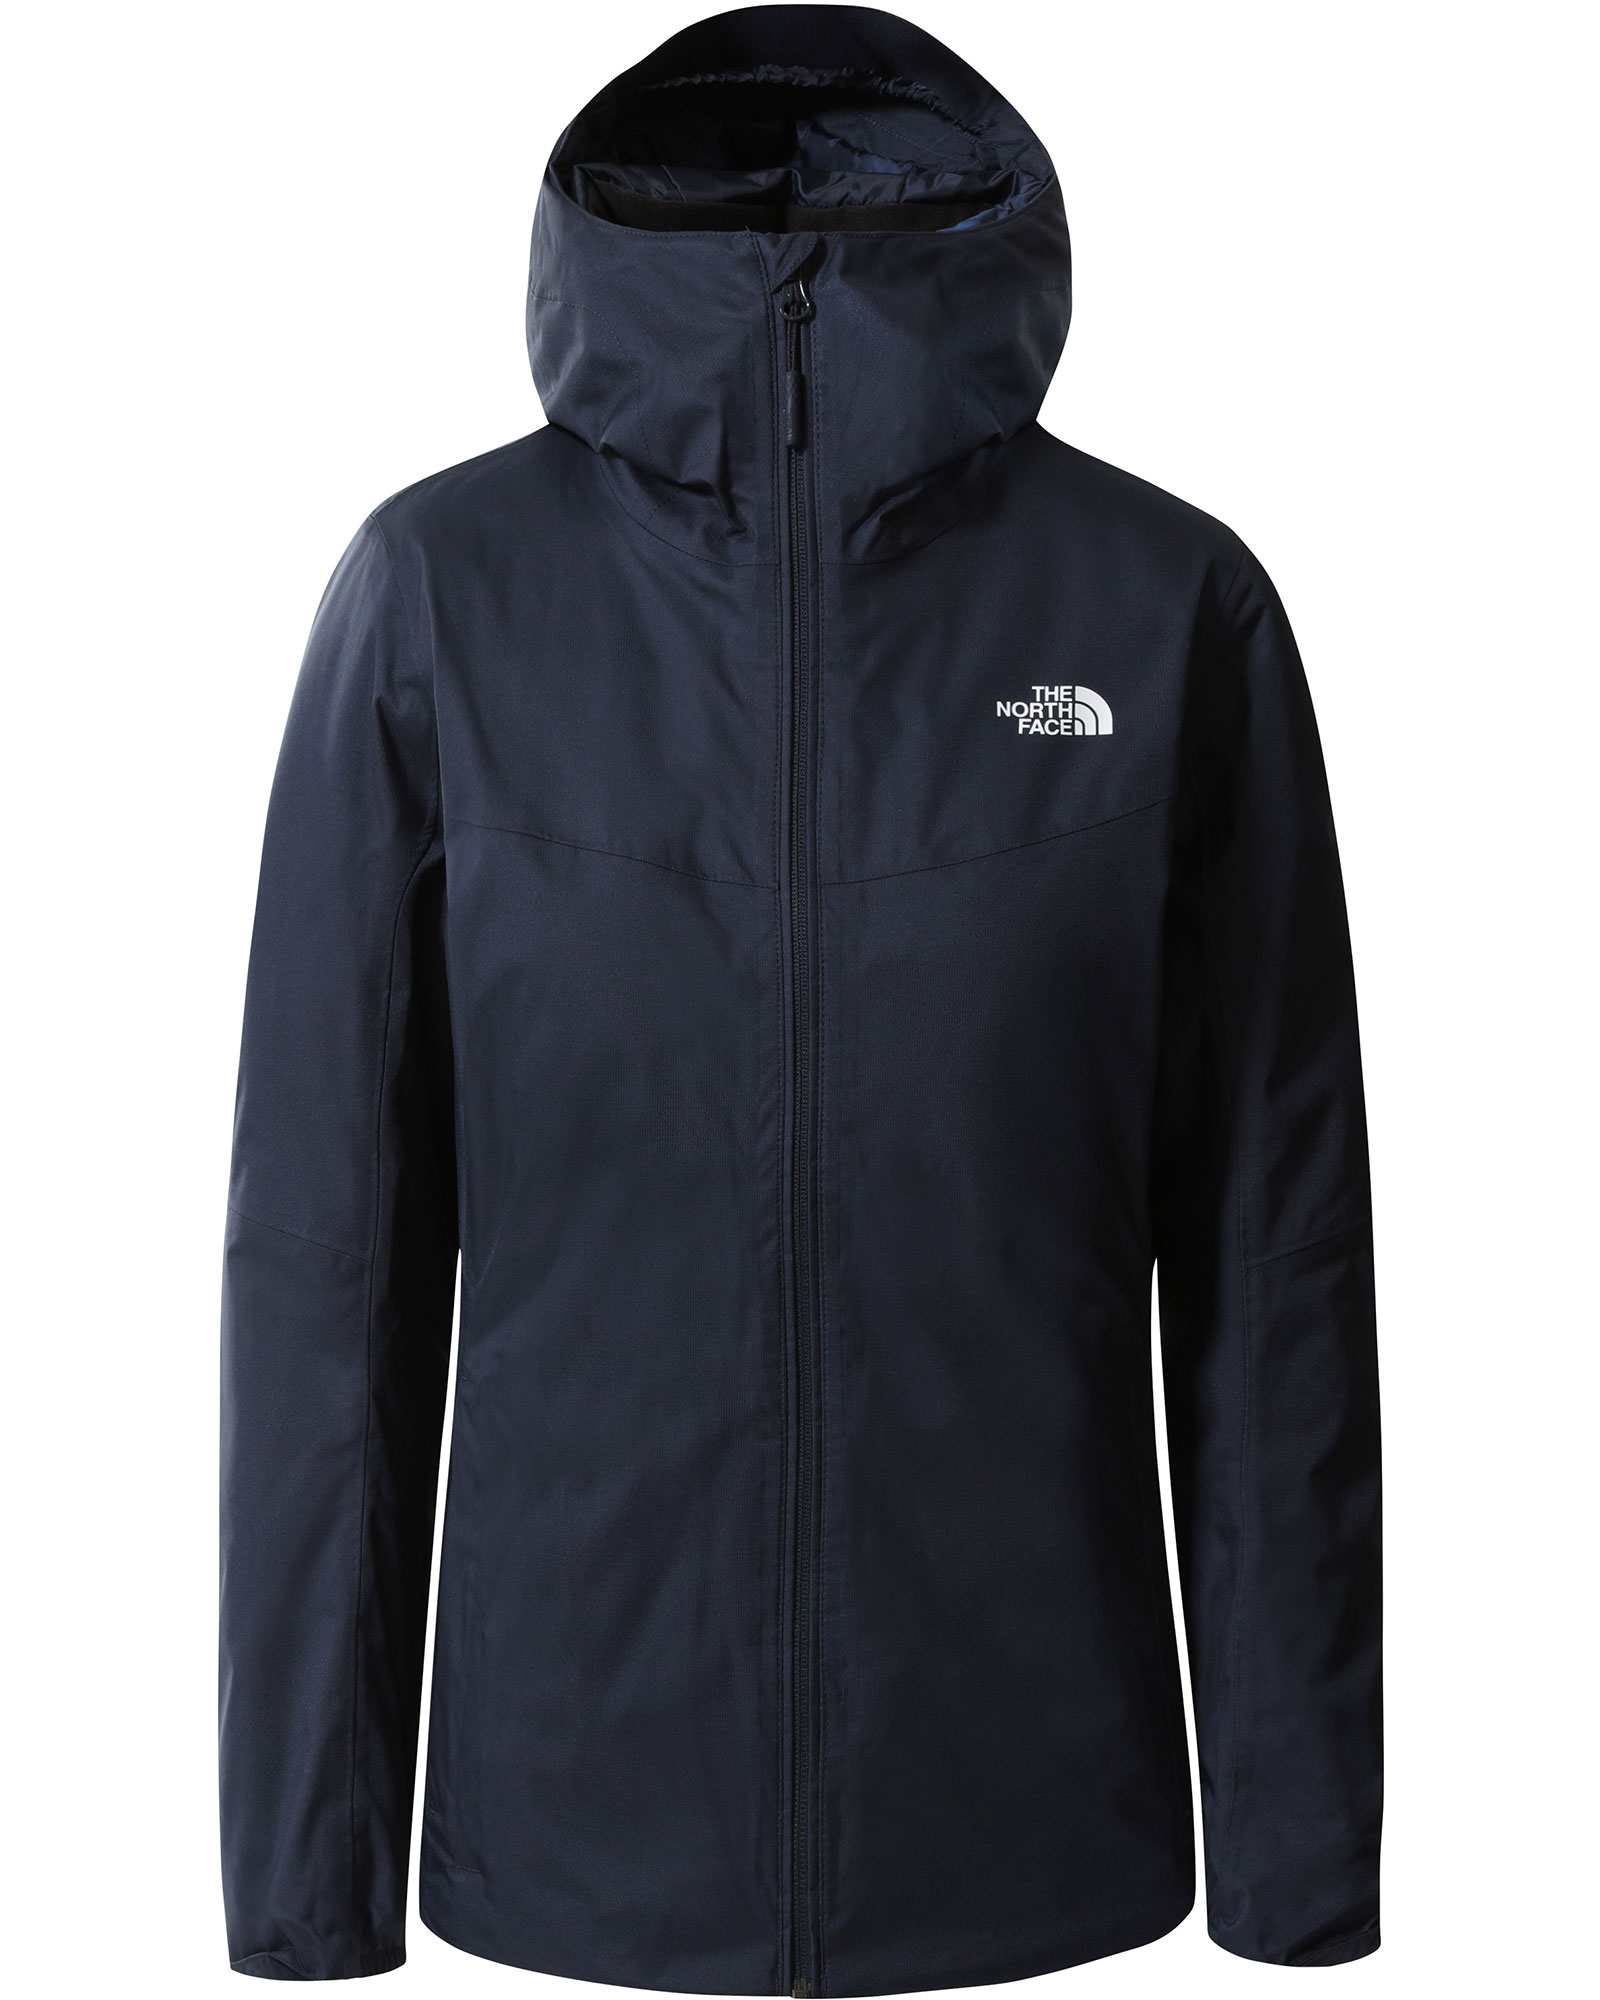 The North Face Quest DryVent Women’s Insulated Jacket - Urban Navy M